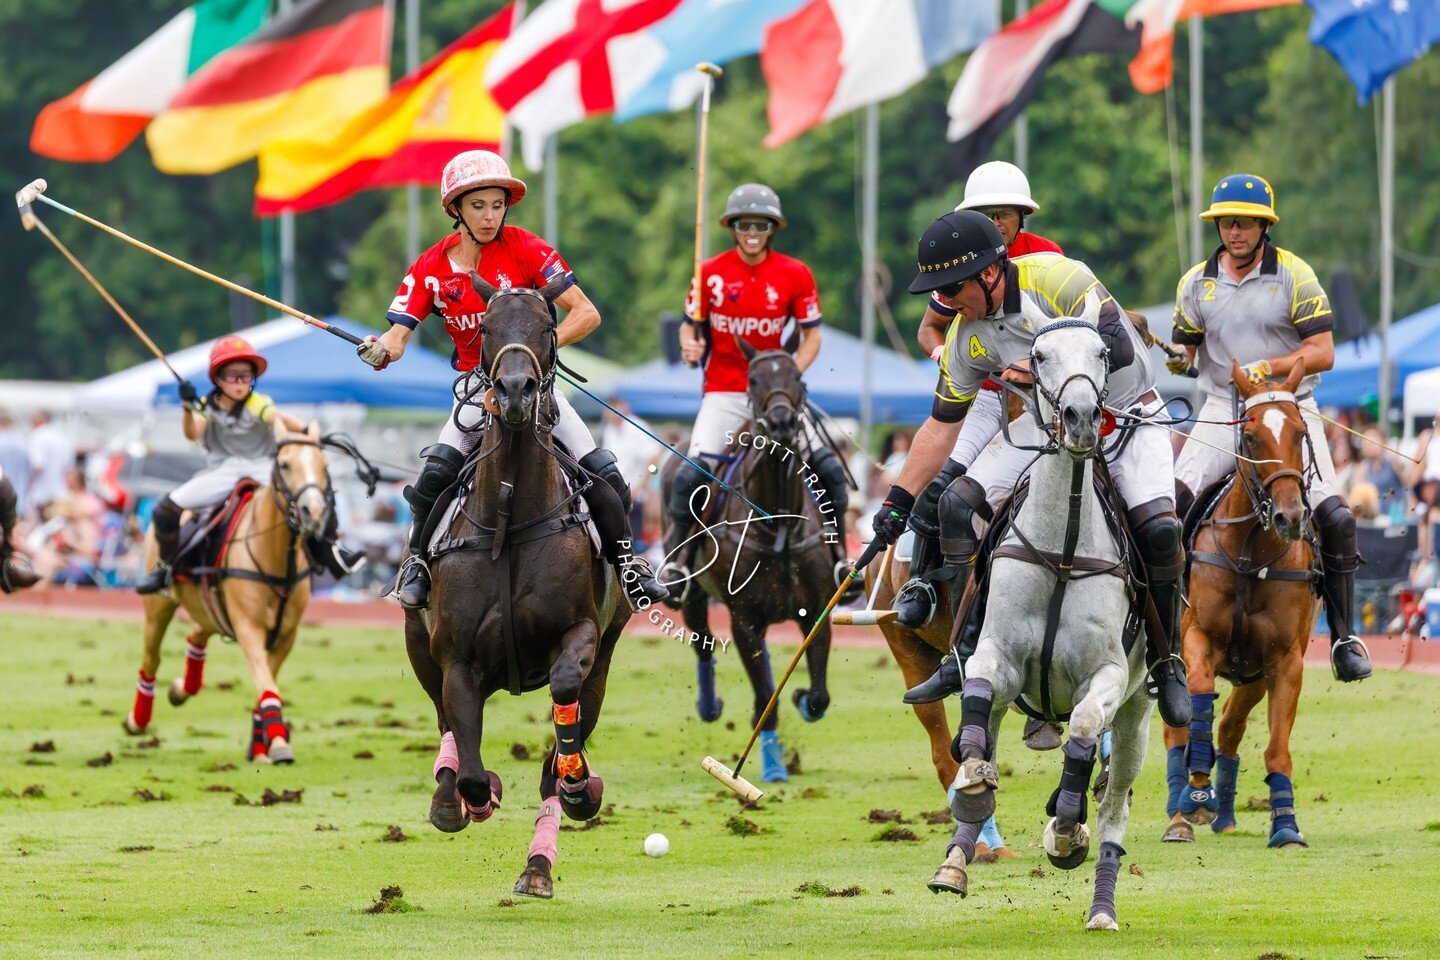 Photos from the Newport vs. Pittsburgh match this week are now on the website.
Direct link is: https://buff.ly/3OiC0aC or at link in Bio
@juanantoniovillamil45 you looked great out there for Pittsburgh! #polo #newportinternationalpolo #poloponies #eq